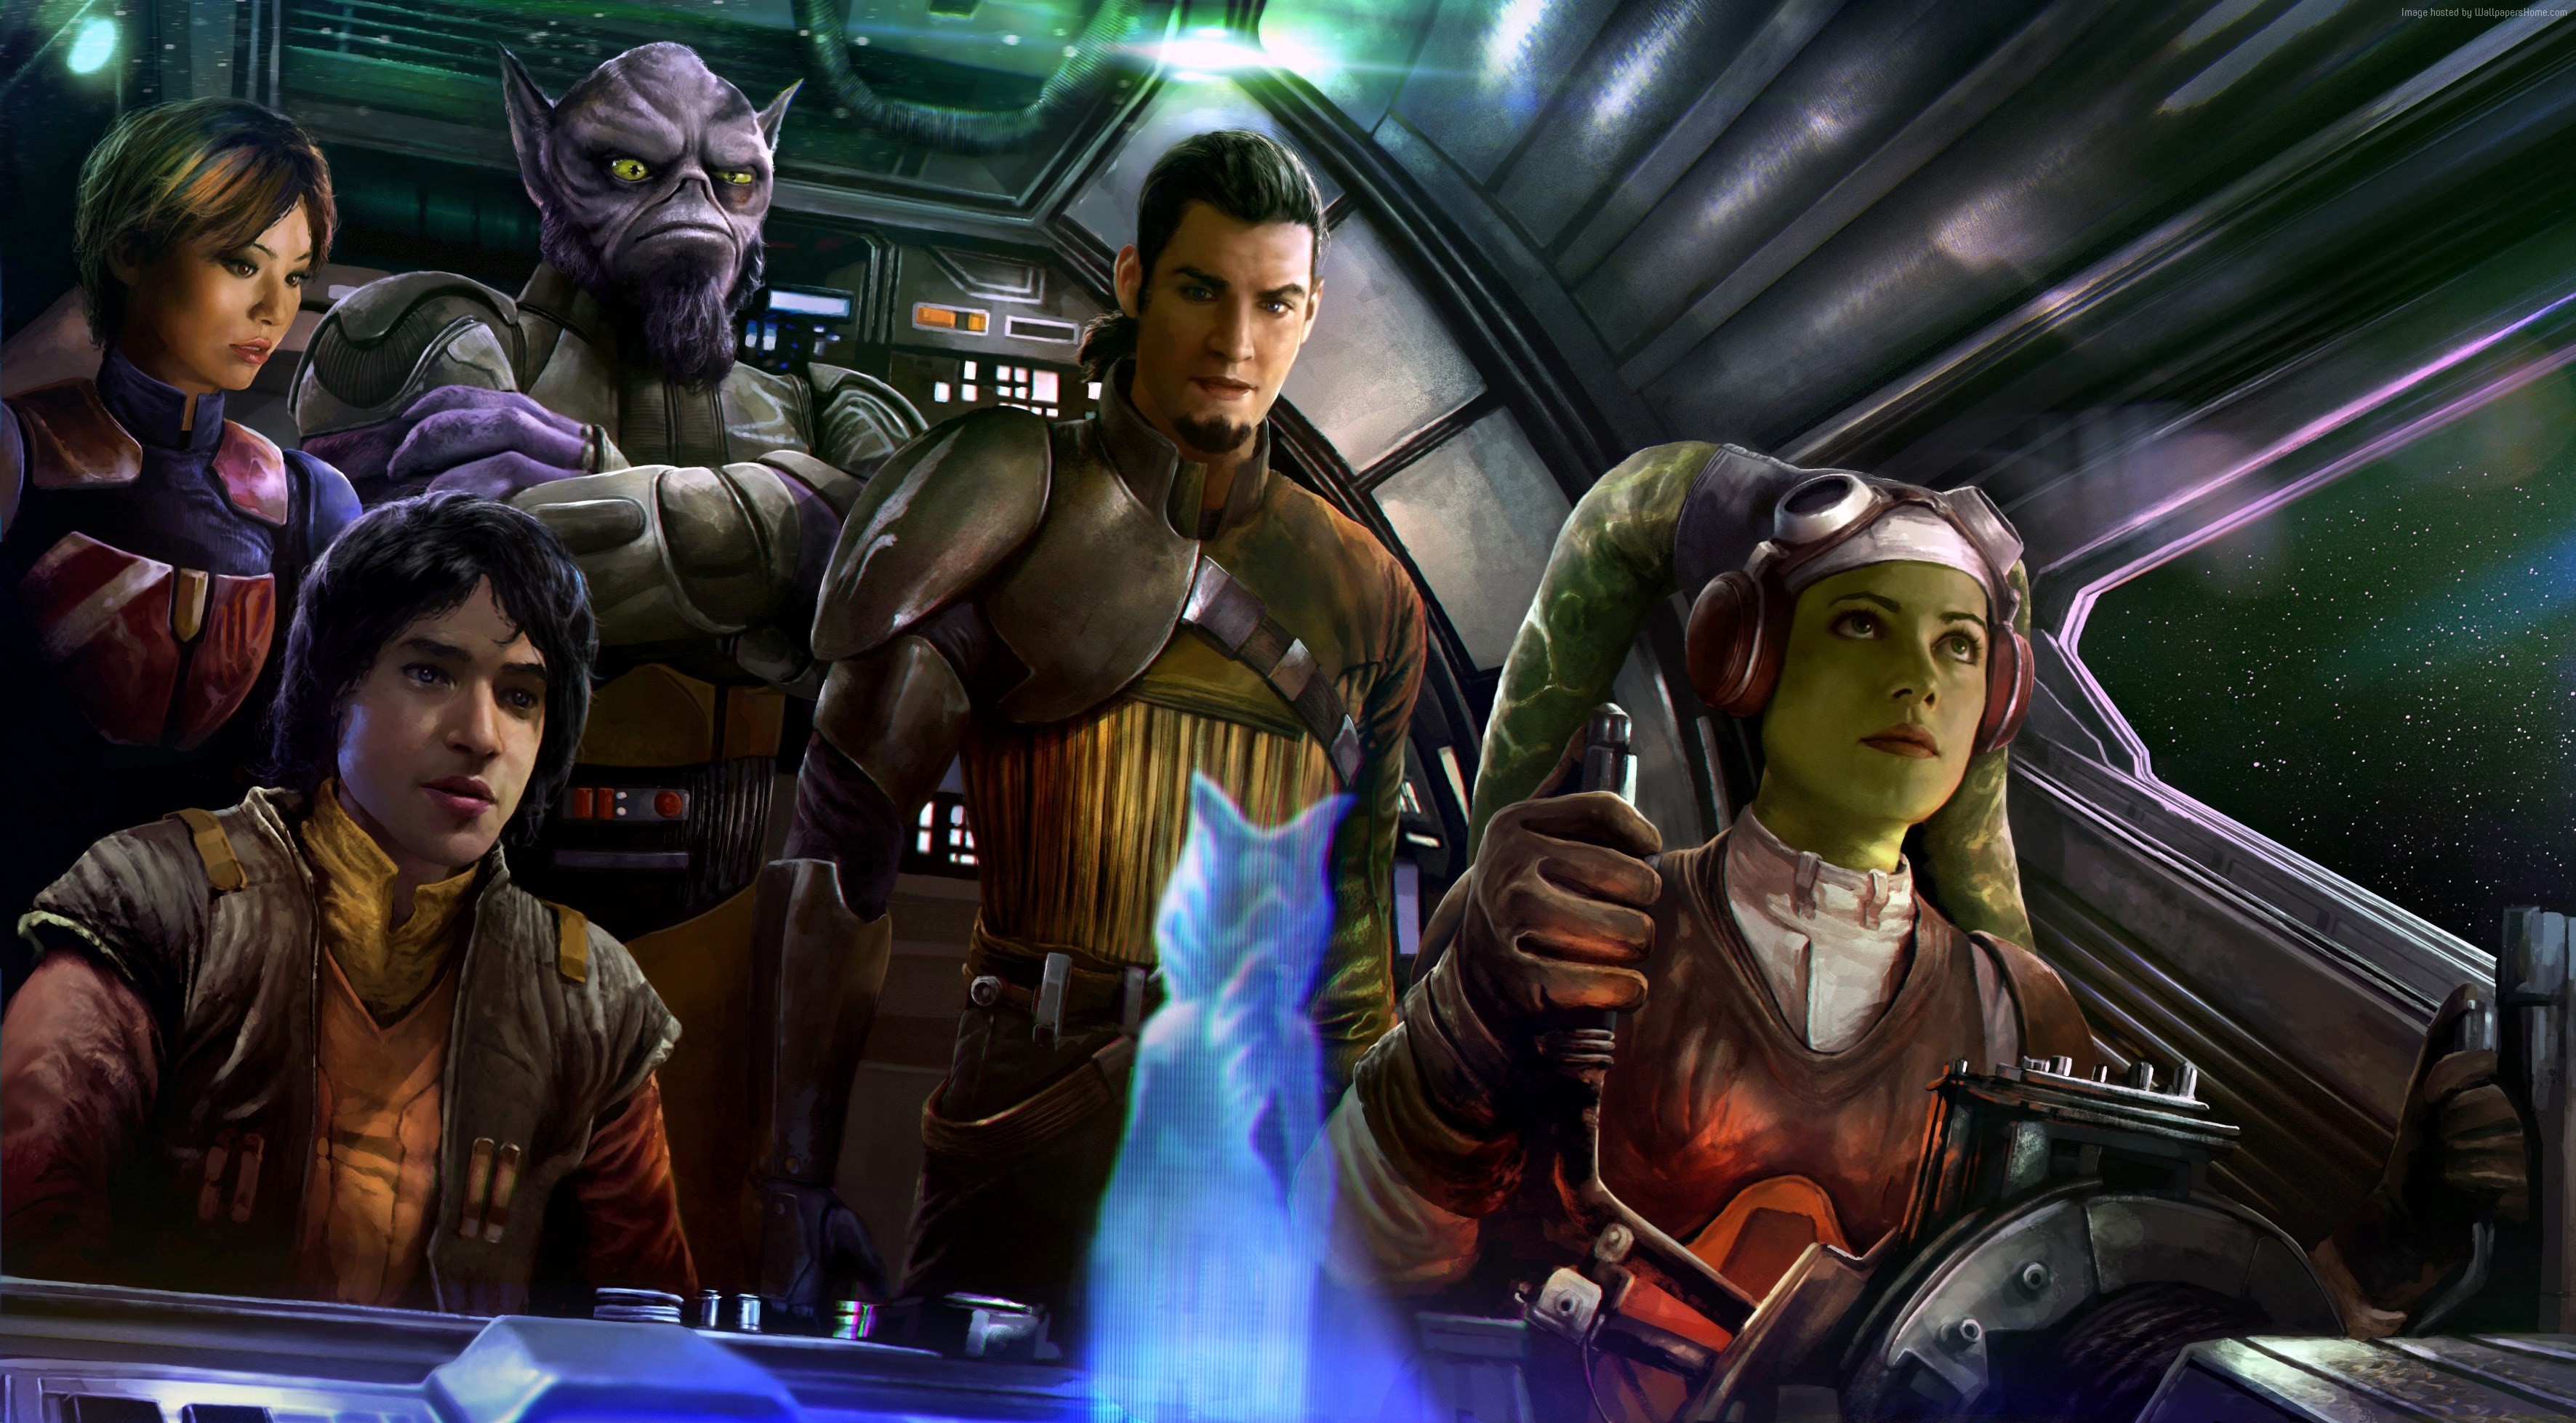 3543x1957 Your Resolution: 1024x1024. Available Resolutions: PC Mac Android iOS  Custom. Tags: Star Wars Rebels ...